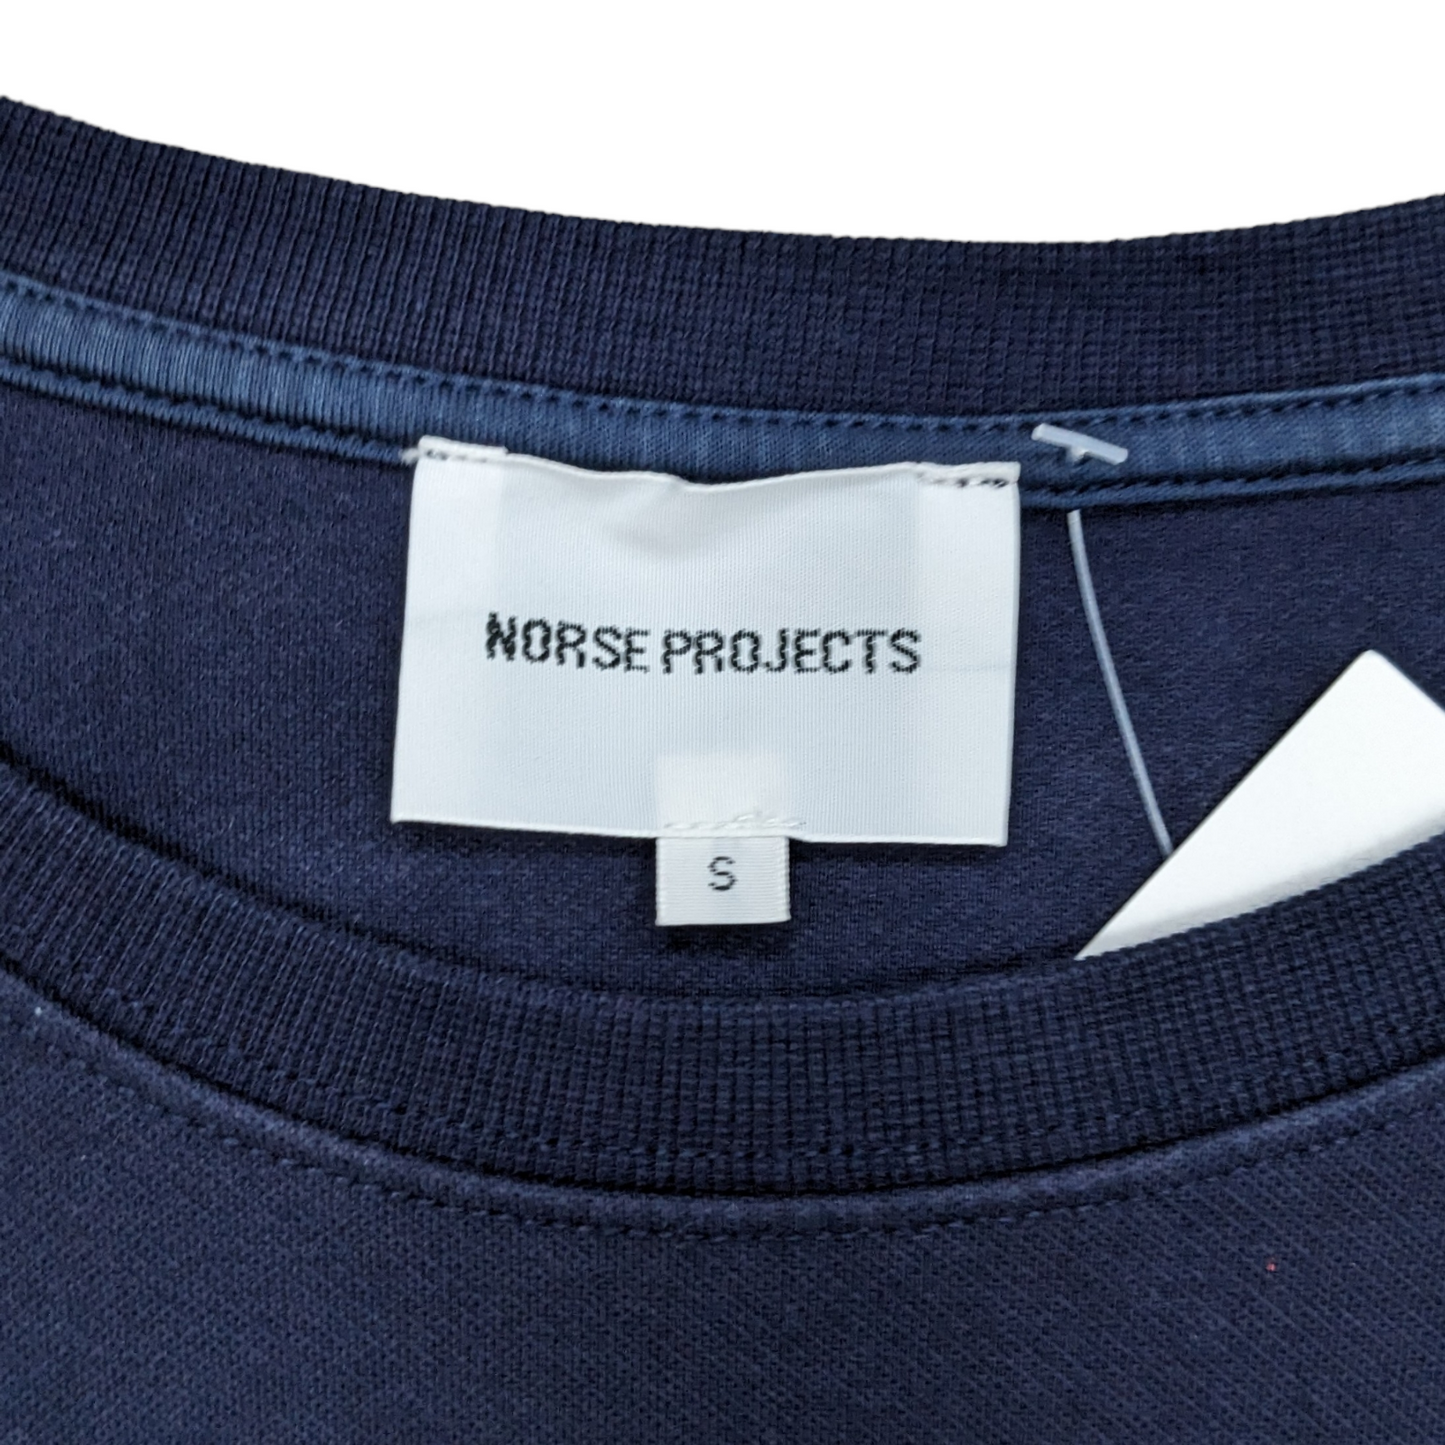 Norse Projects Sweatshirt Size S